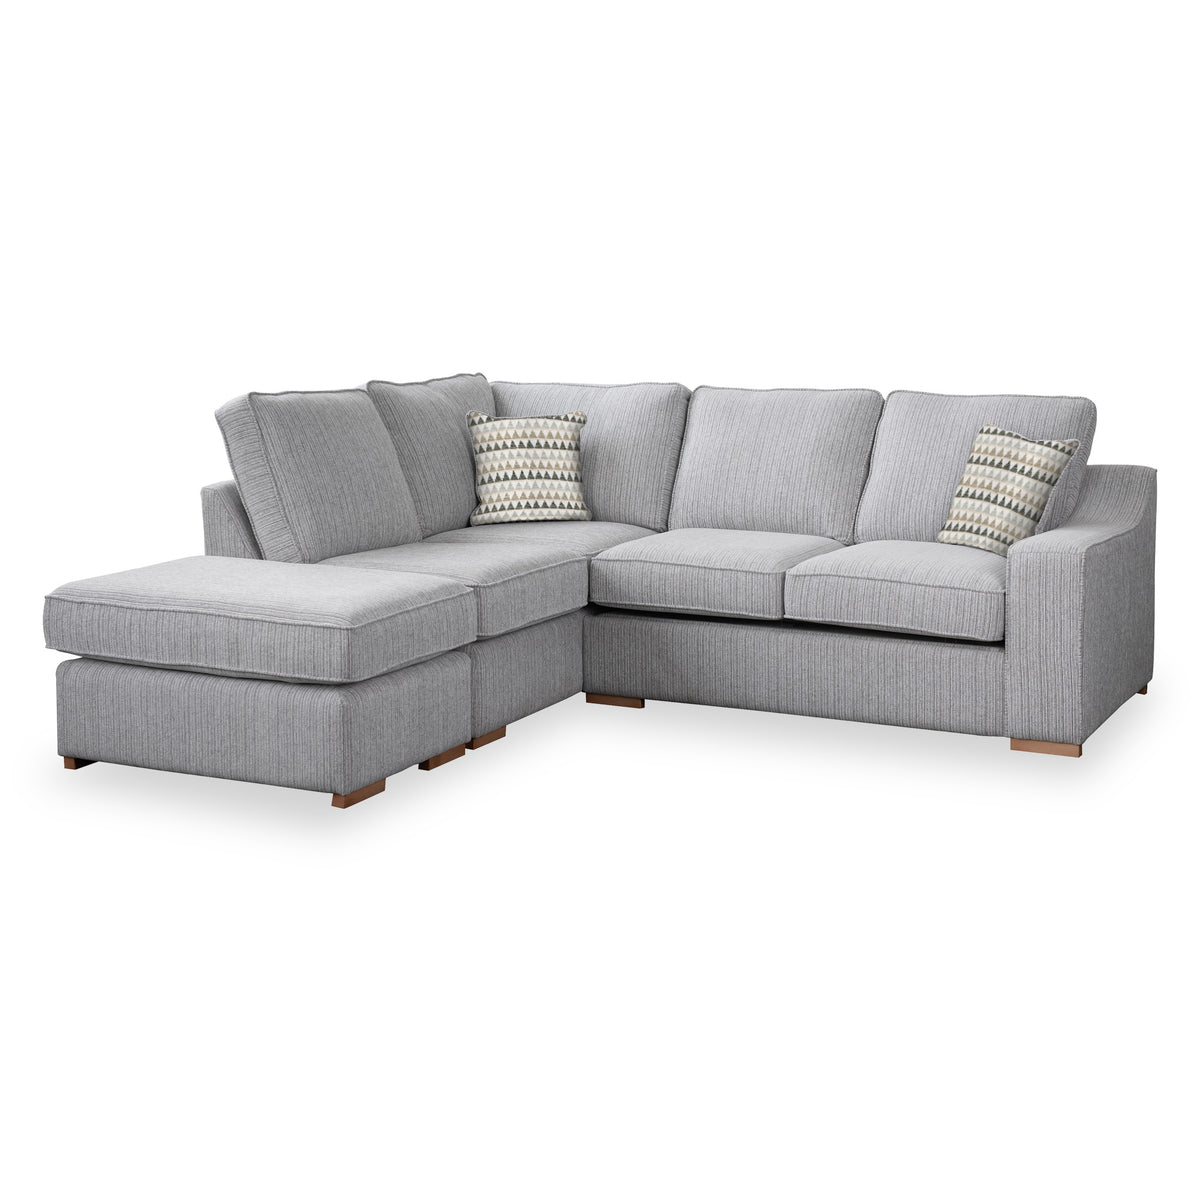 Ashow Silver Left Hand Corner Sofabed with Maika Beige Scatter Cushions from Roseland furniture